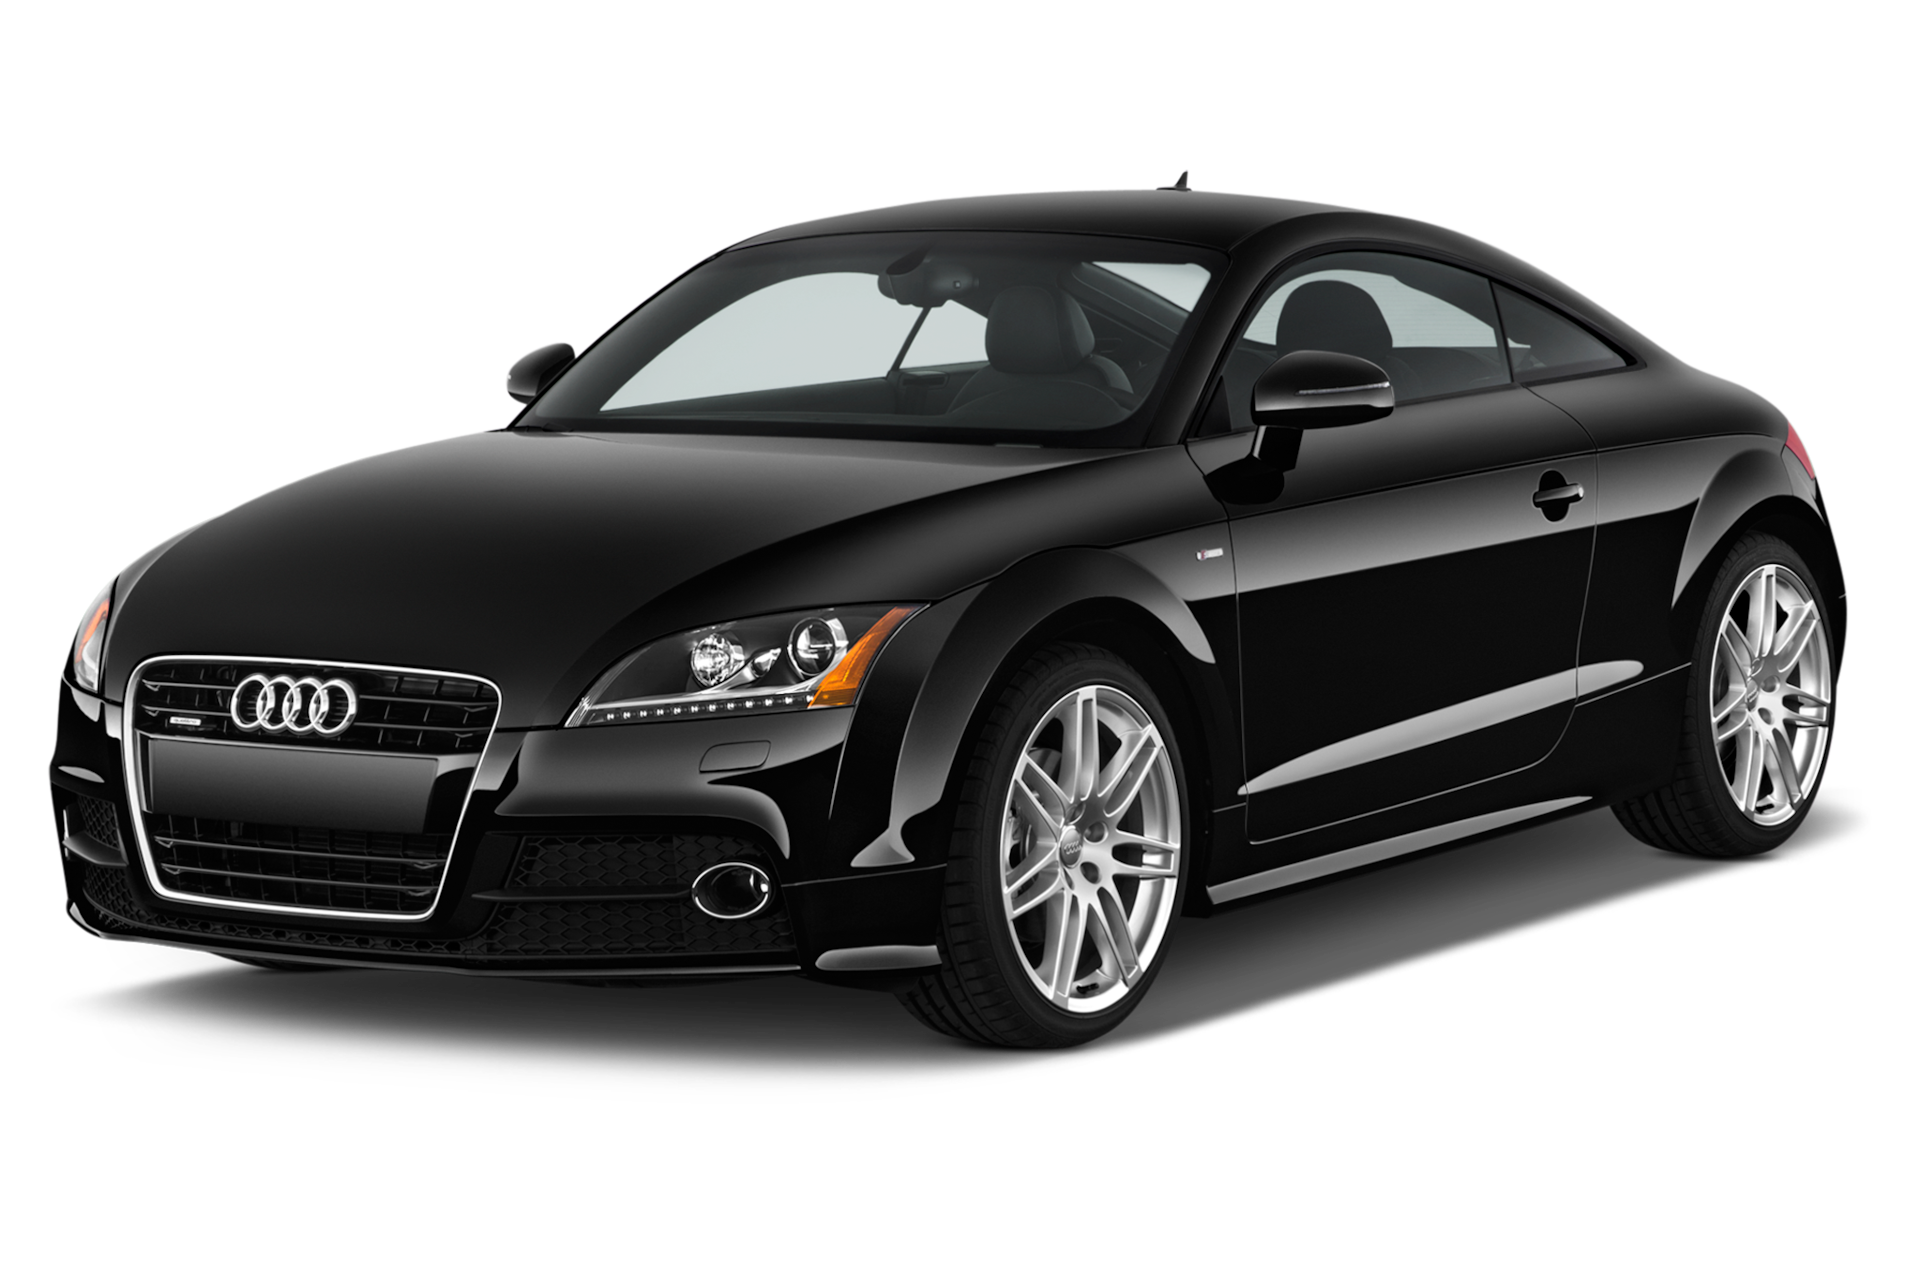 2012 Audi TT Prices, Reviews, and Photos - MotorTrend